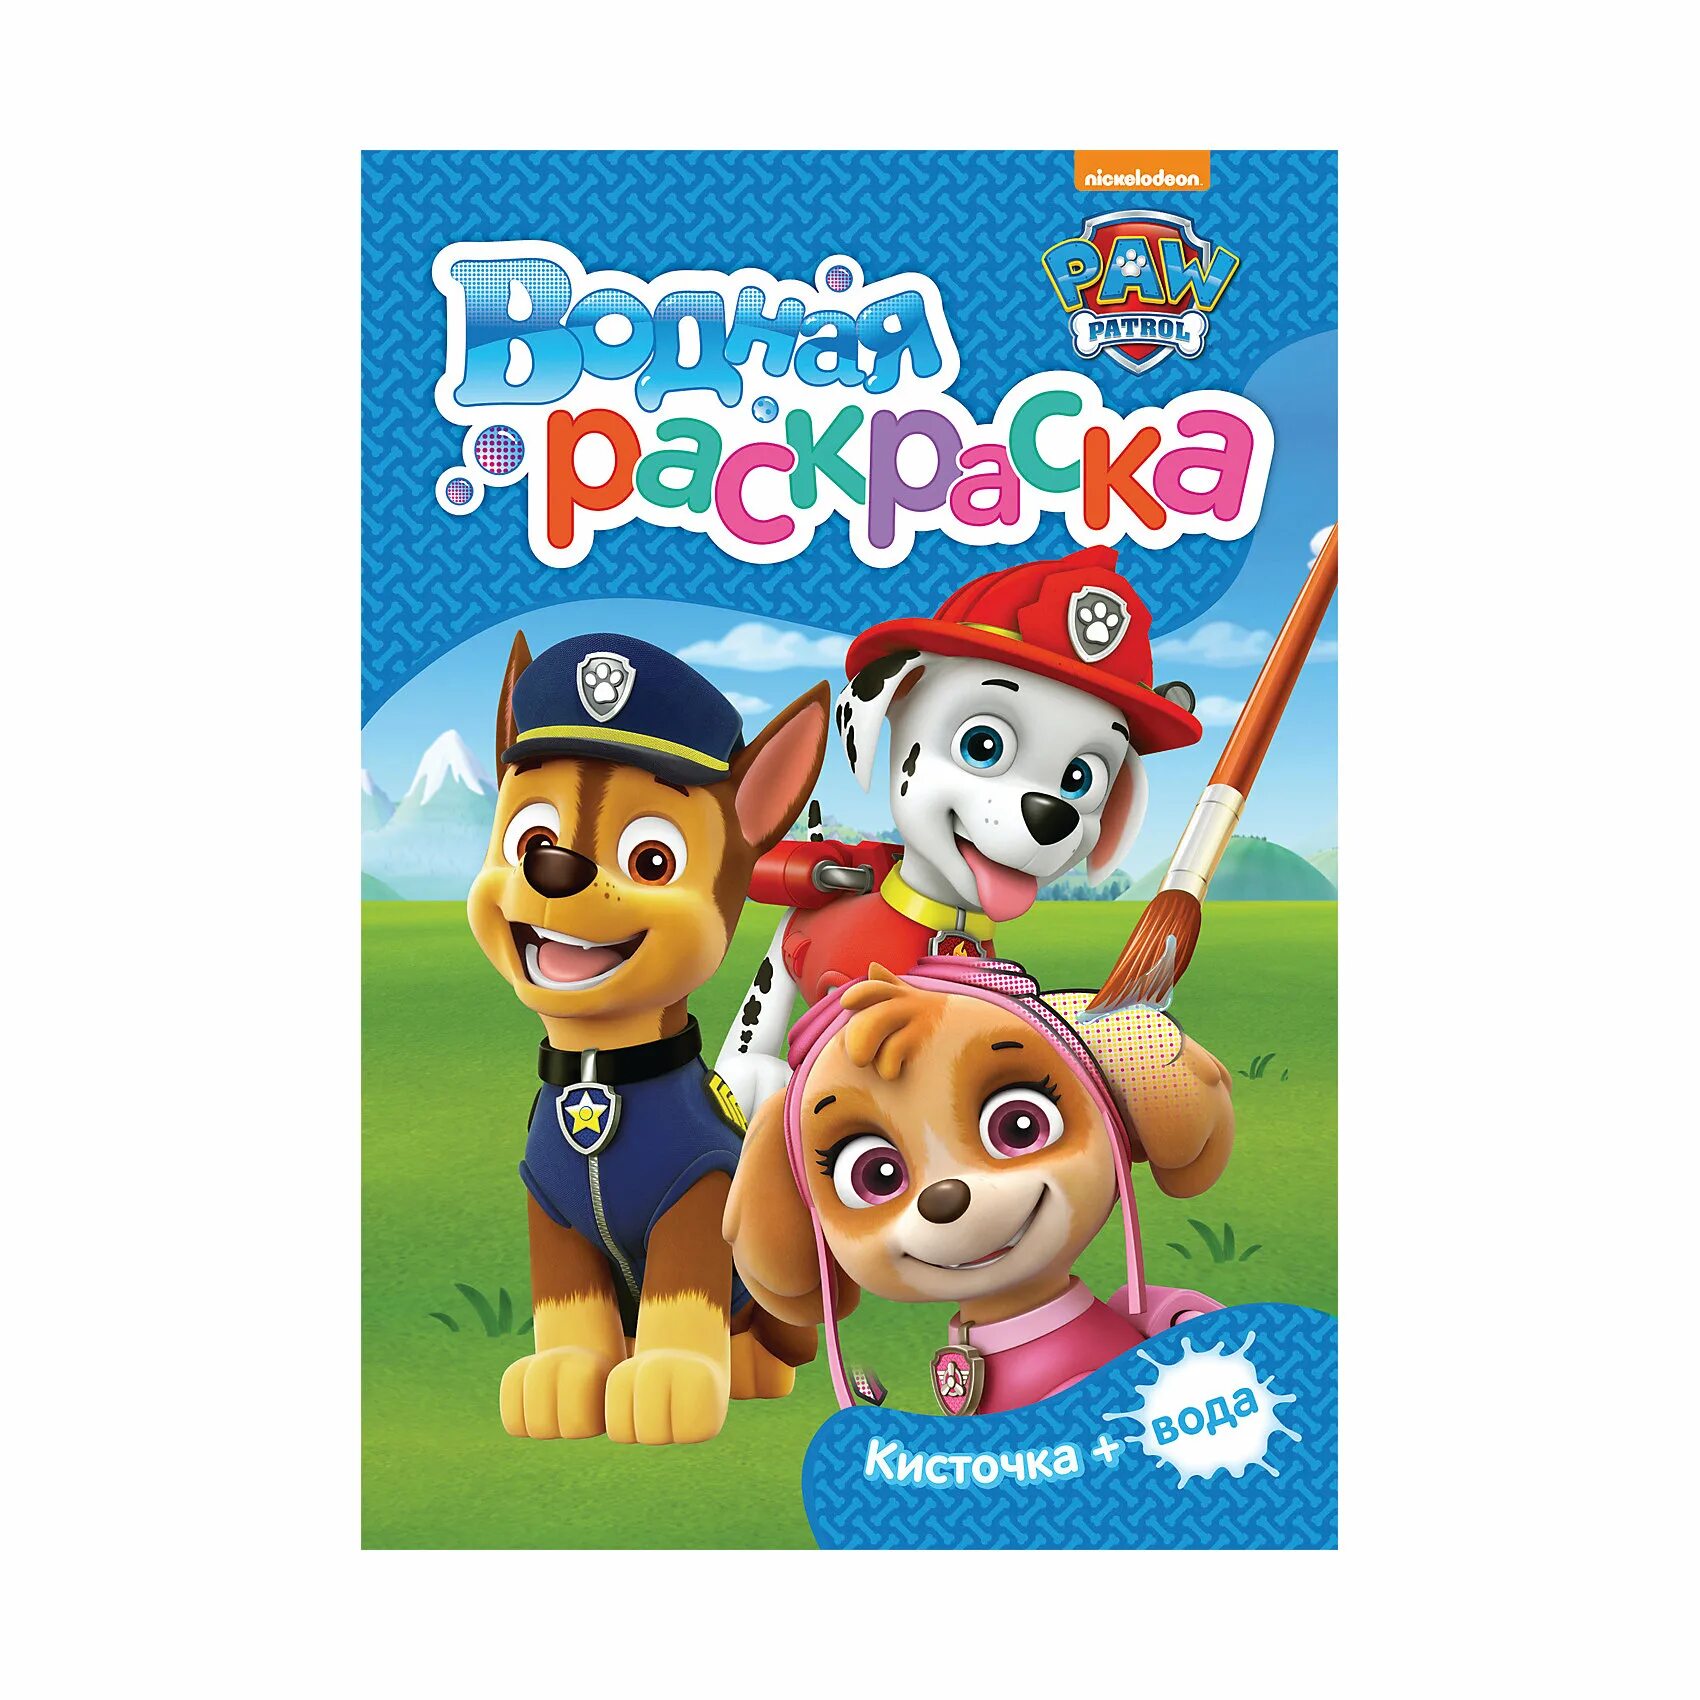 Adorable Paw Patrol Coloring Page